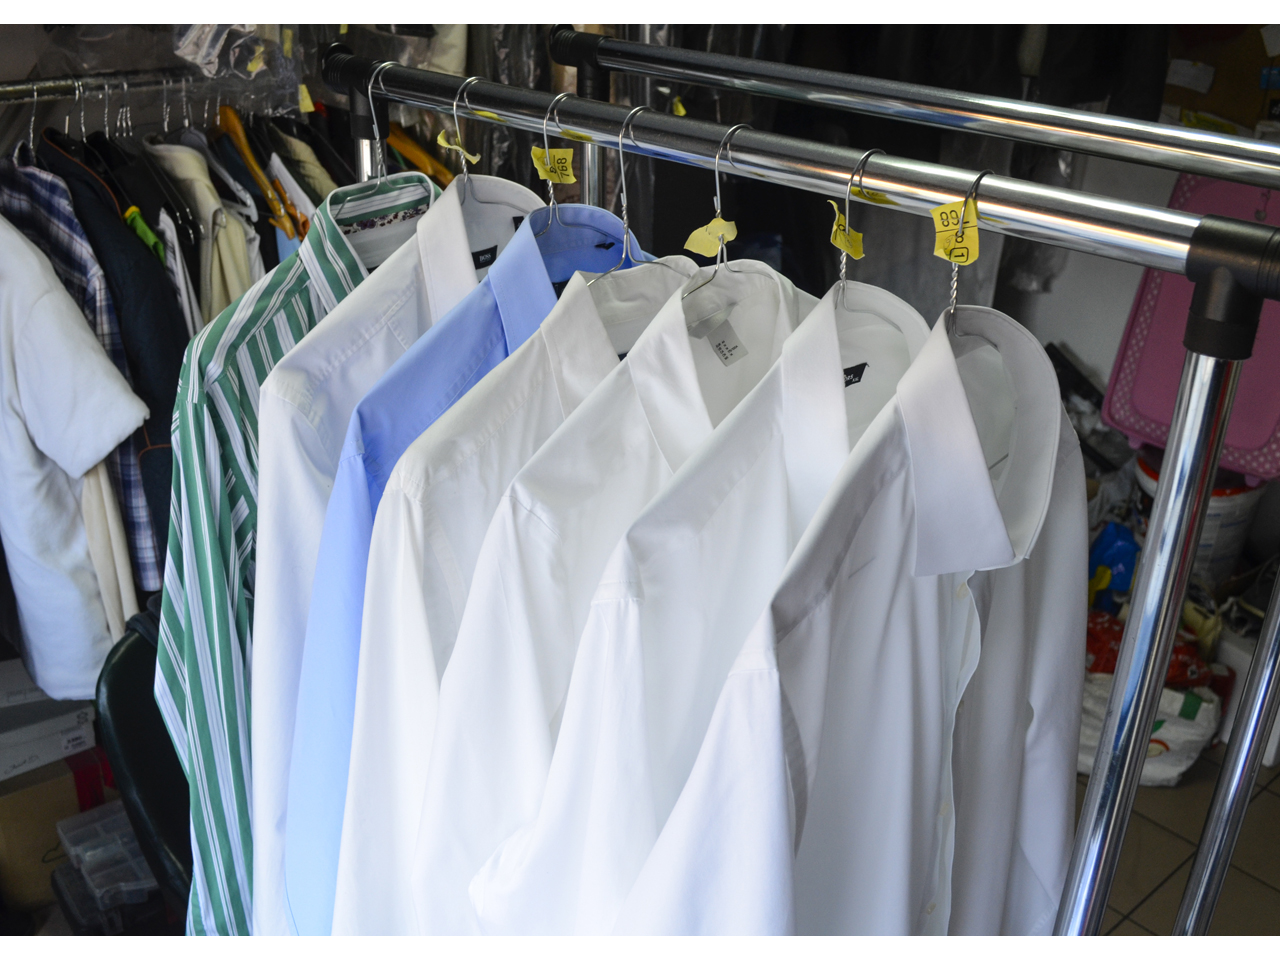 DRY CLEANING HEMOBILE Dry-cleaning Beograd